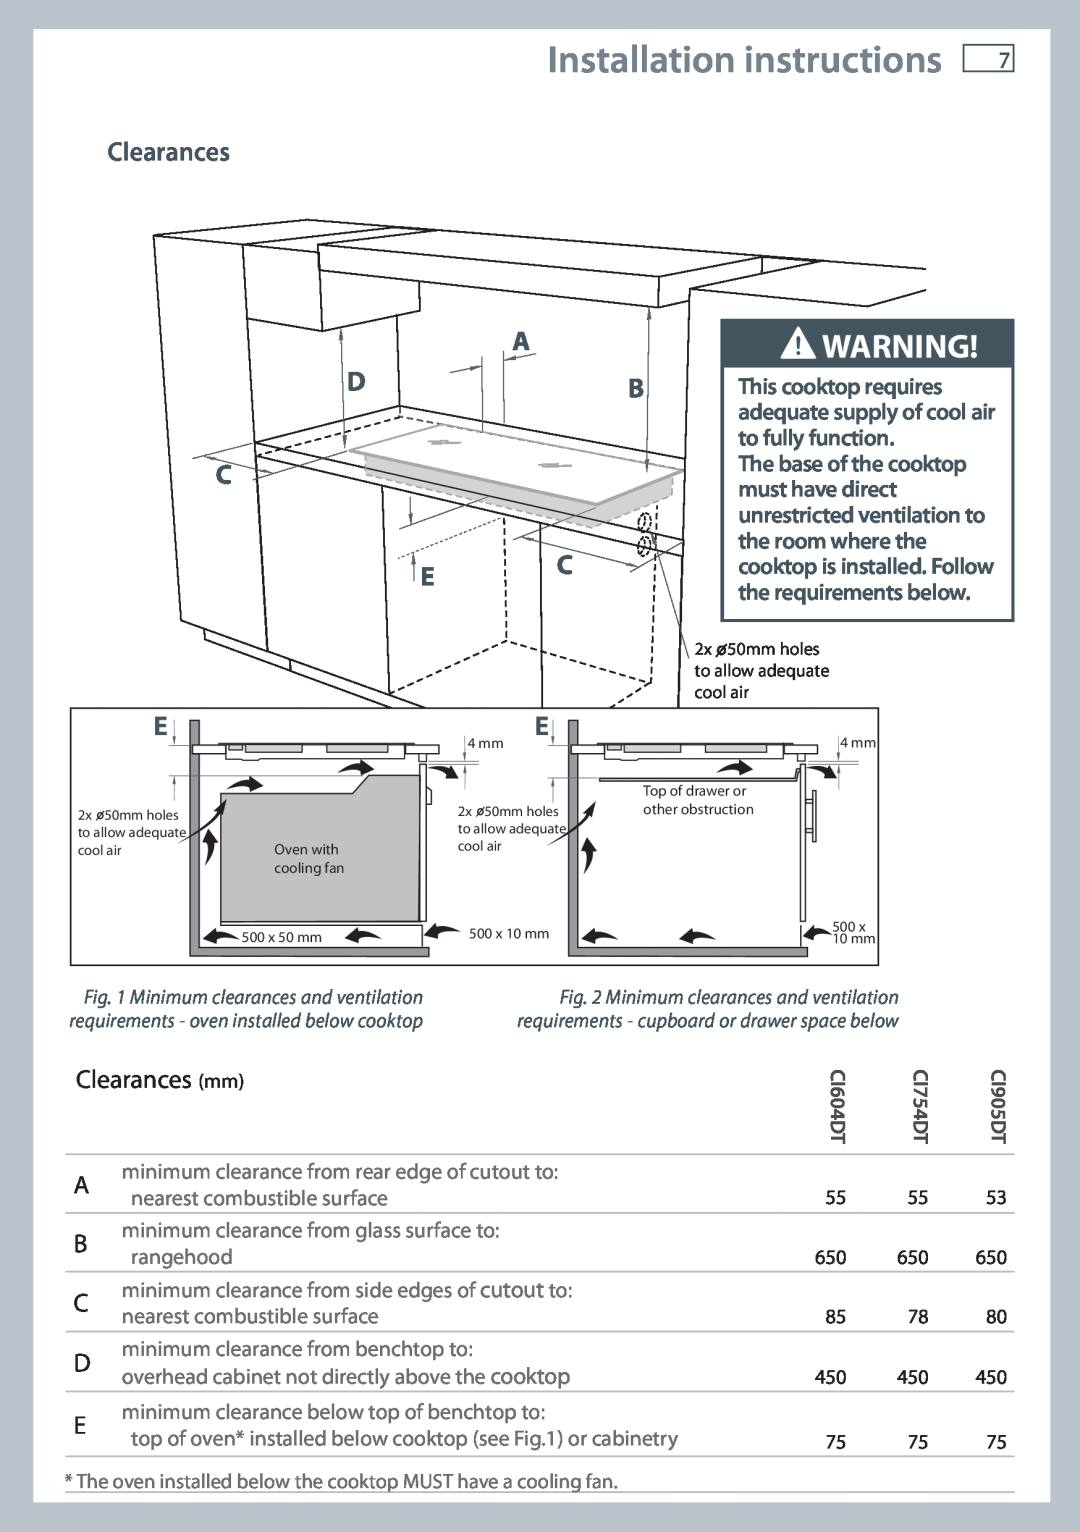 Fisher & Paykel CI754DT Installation instructions, Clearances mm, The base of the cooktop, nearest combustible surface 